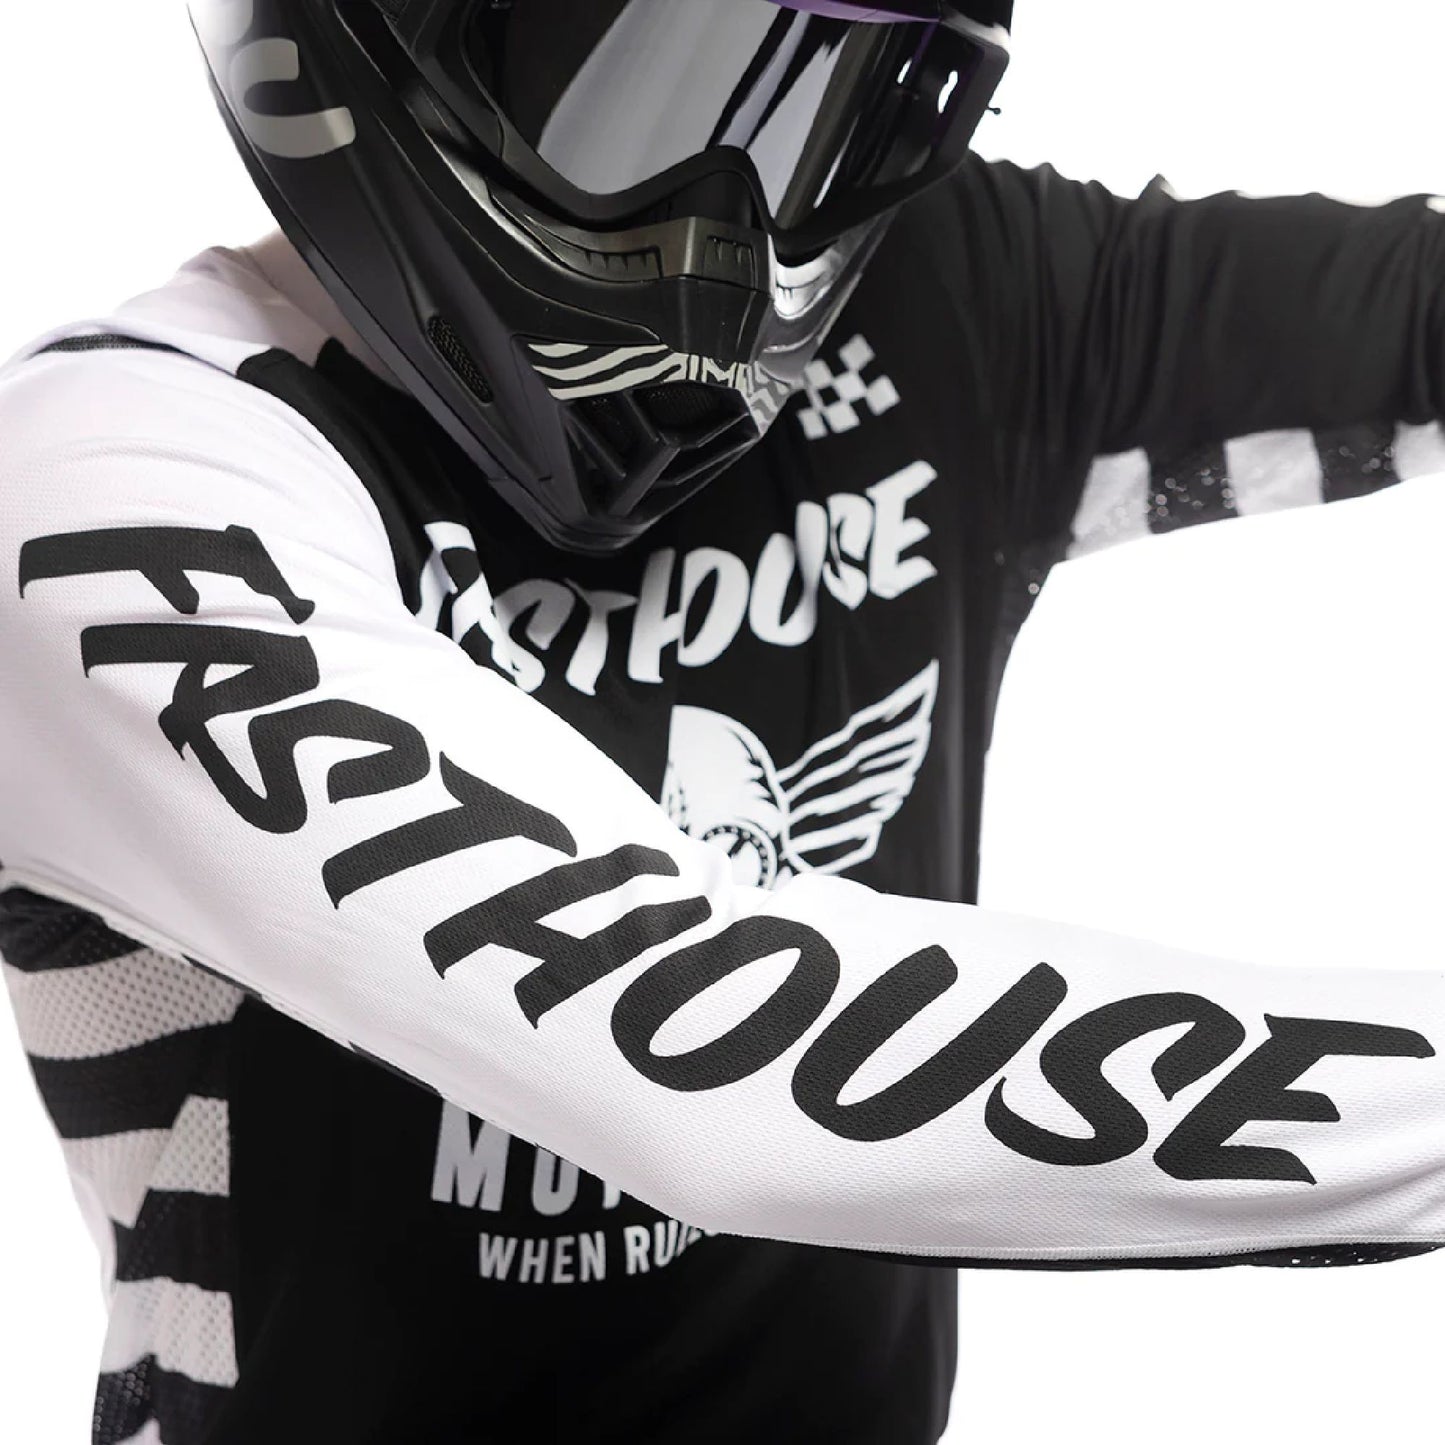 Fasthouse Youth USA Grindhouse Factor Jersey Black/White Bike Jerseys